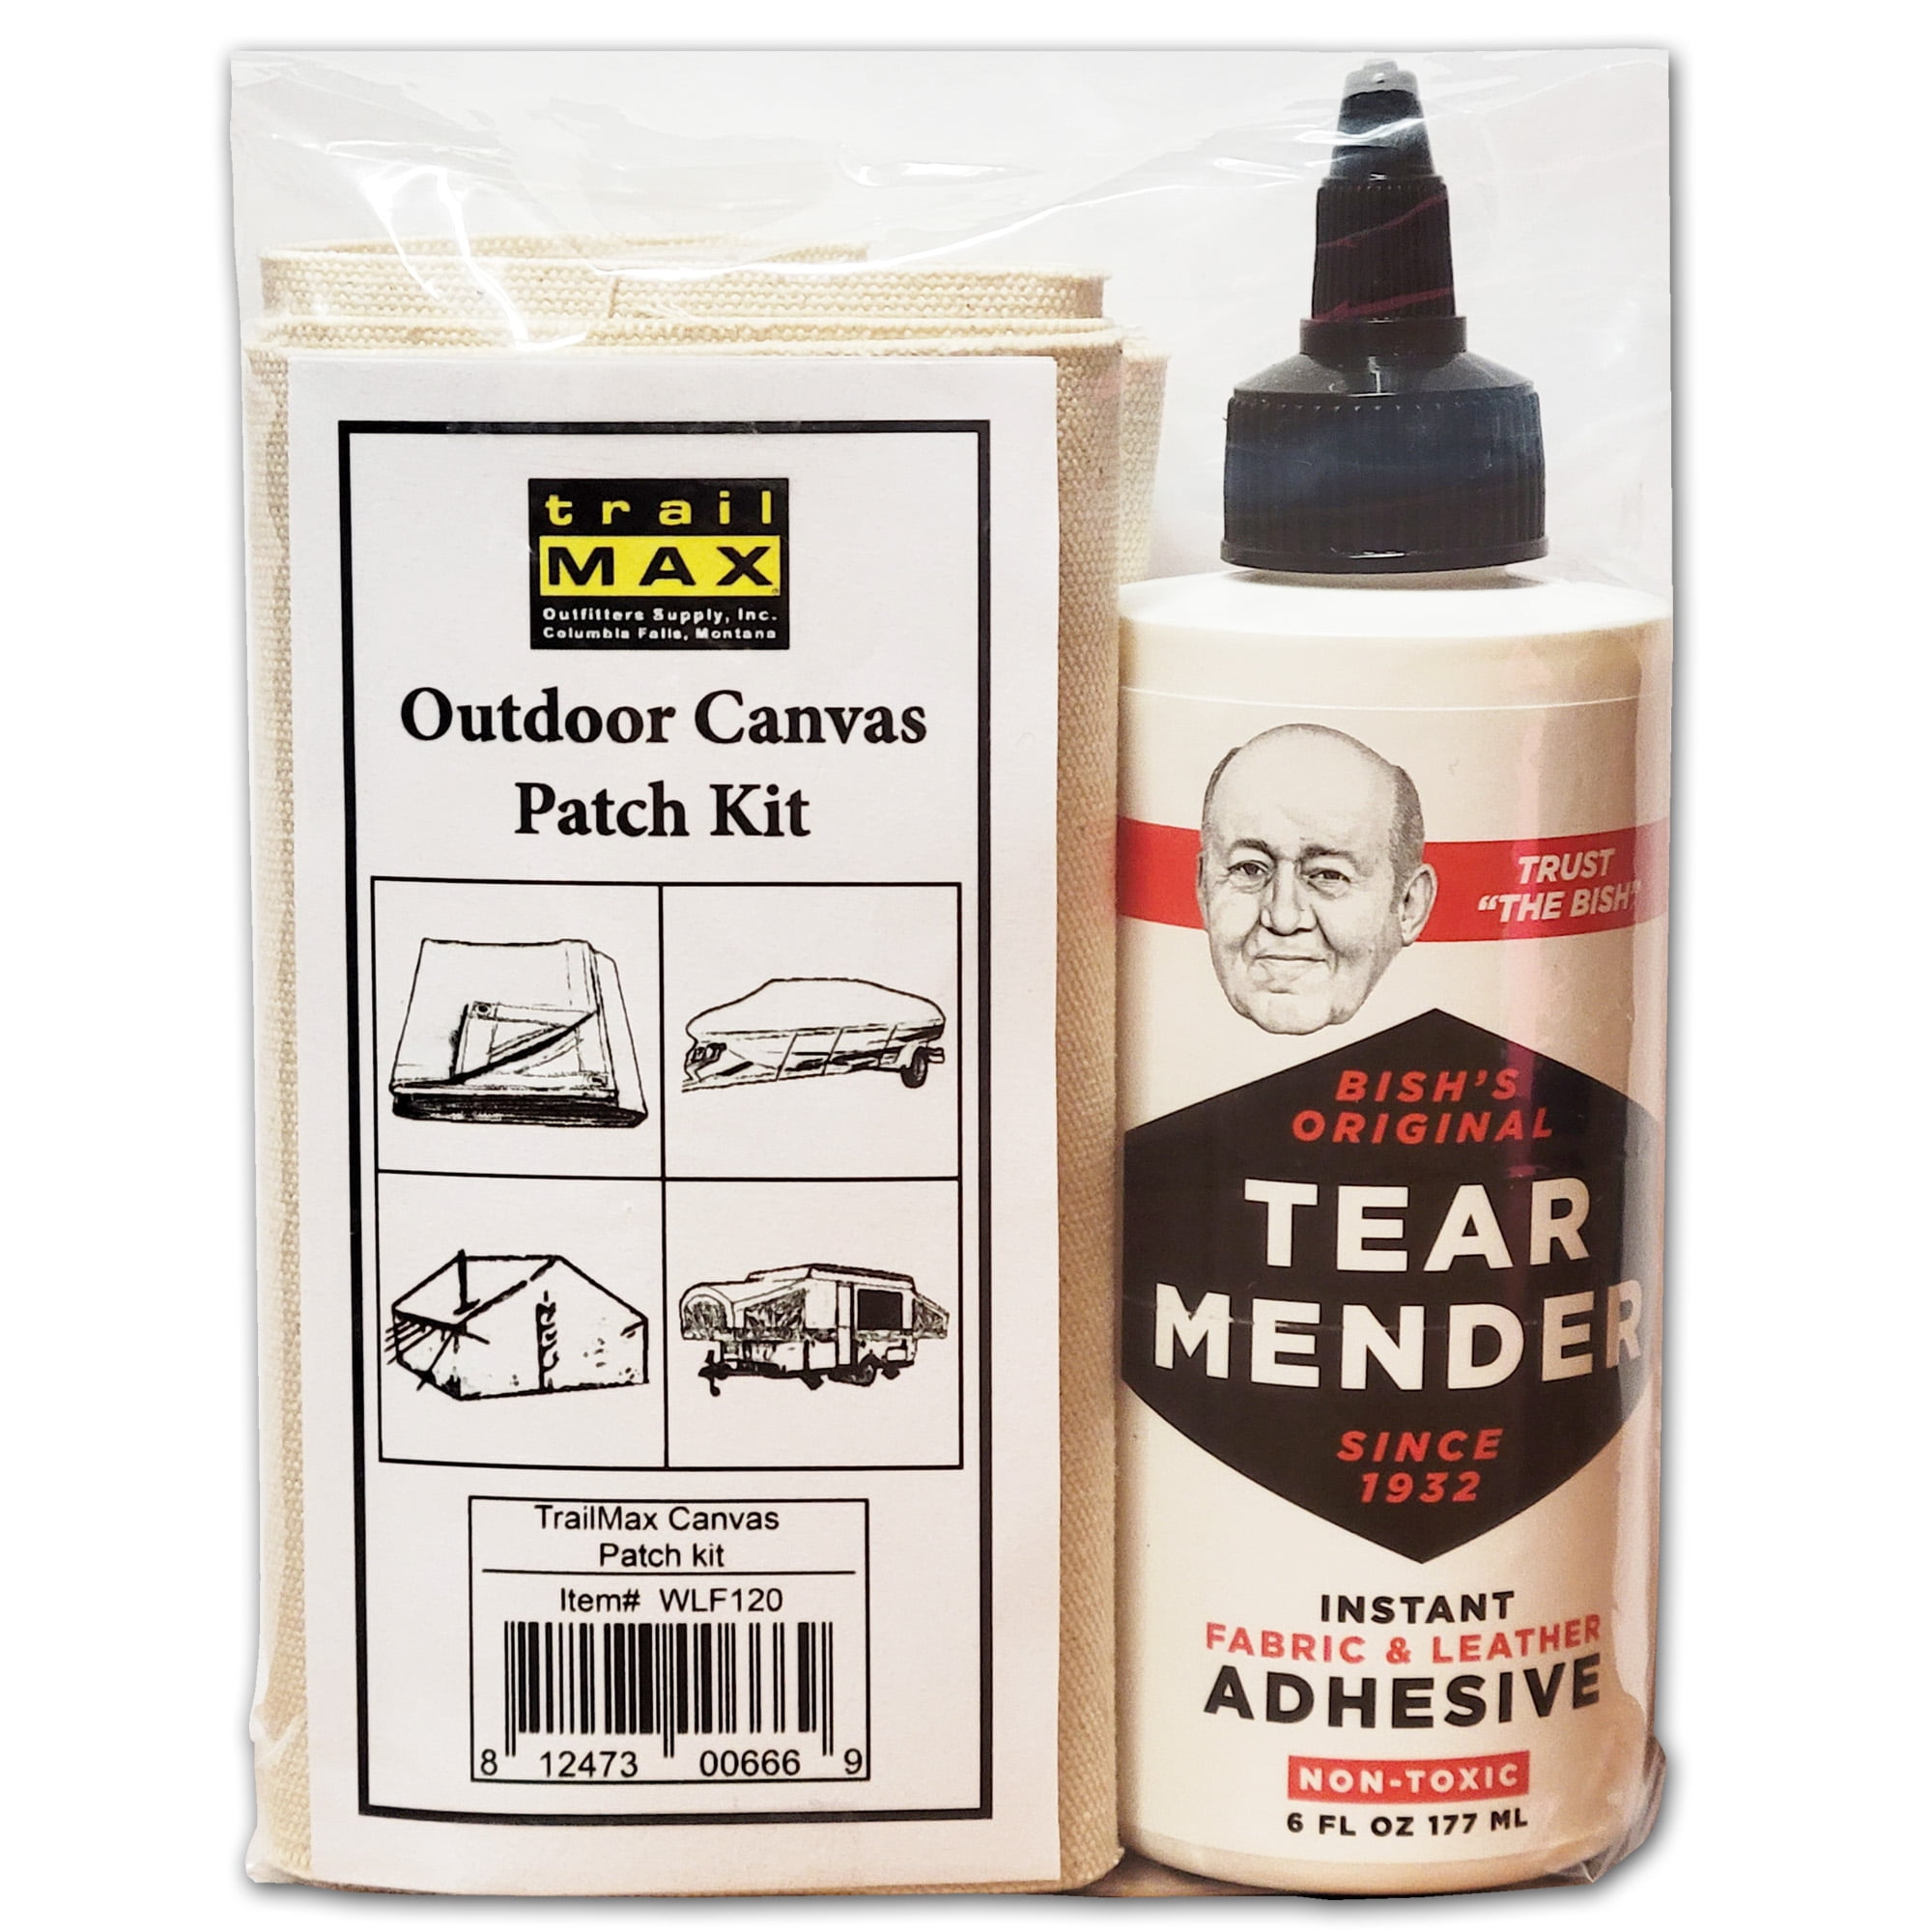 Trailmax Outdoor Canvas Patch Kit to Repair Pop-Up Campers, Canvas Tents, Boat Covers, Tarps